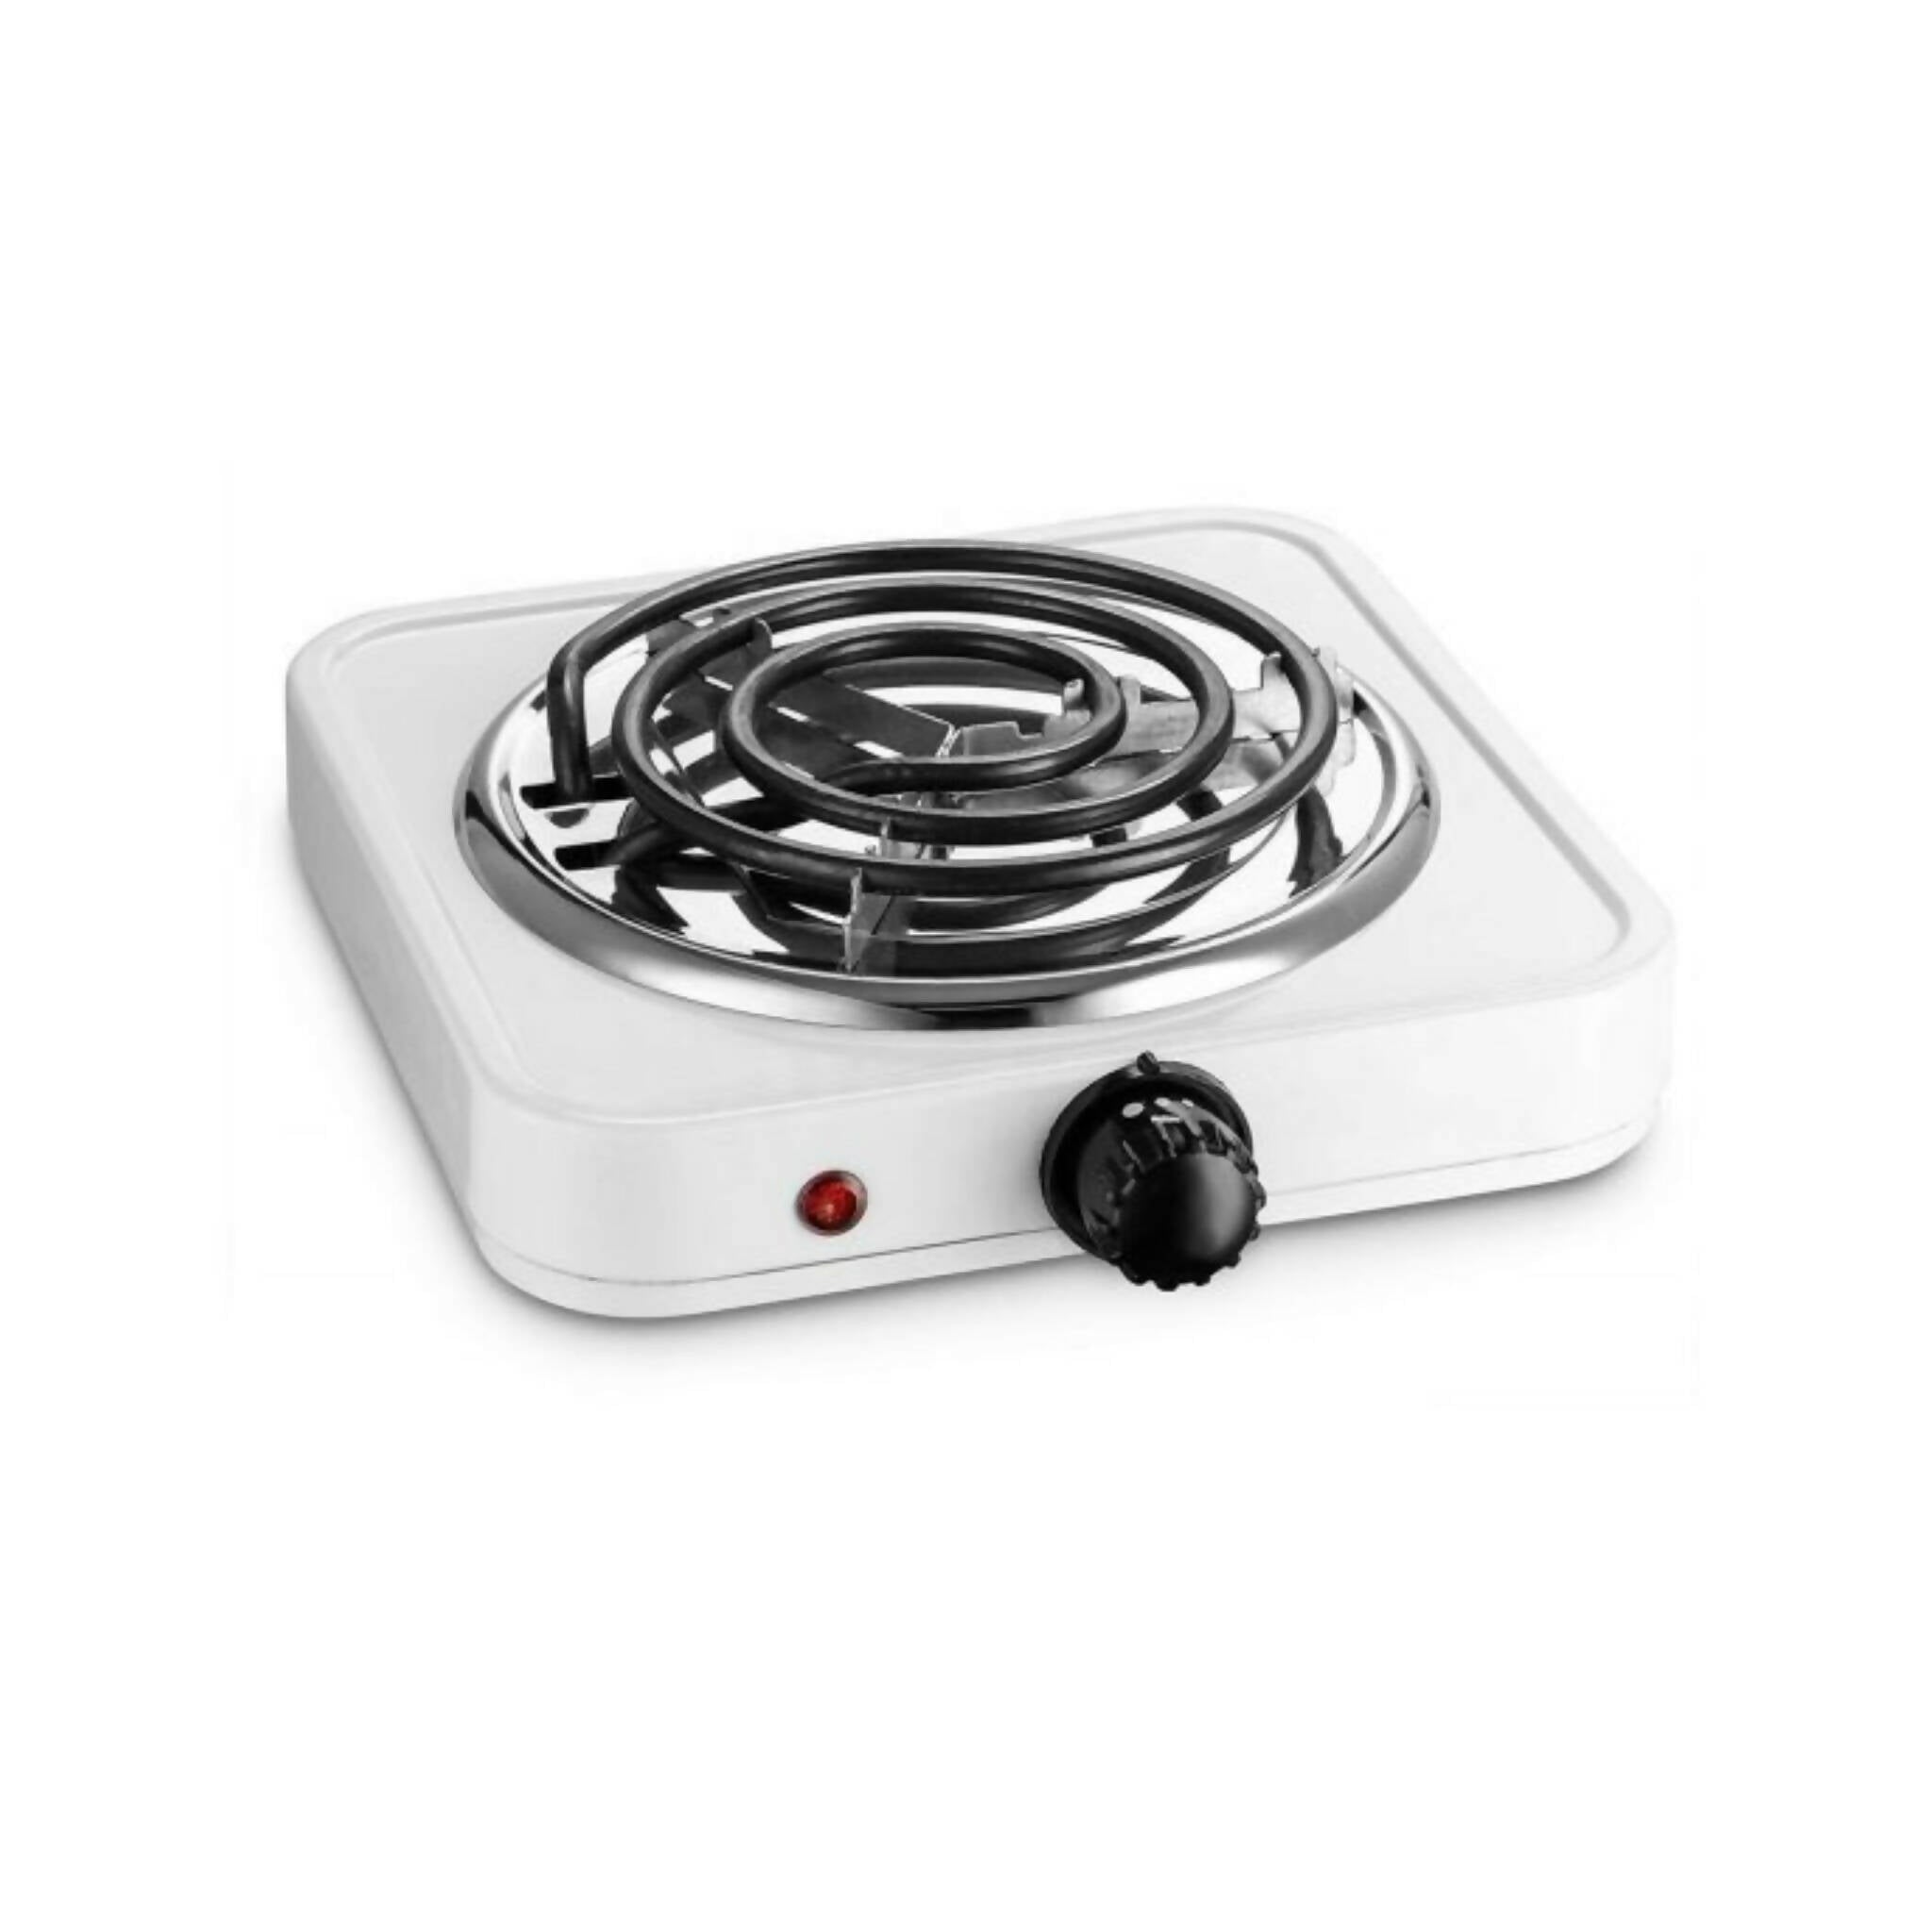 Electric Coil Hot Plate, Portable & Cook Anywhere, Easy Clean